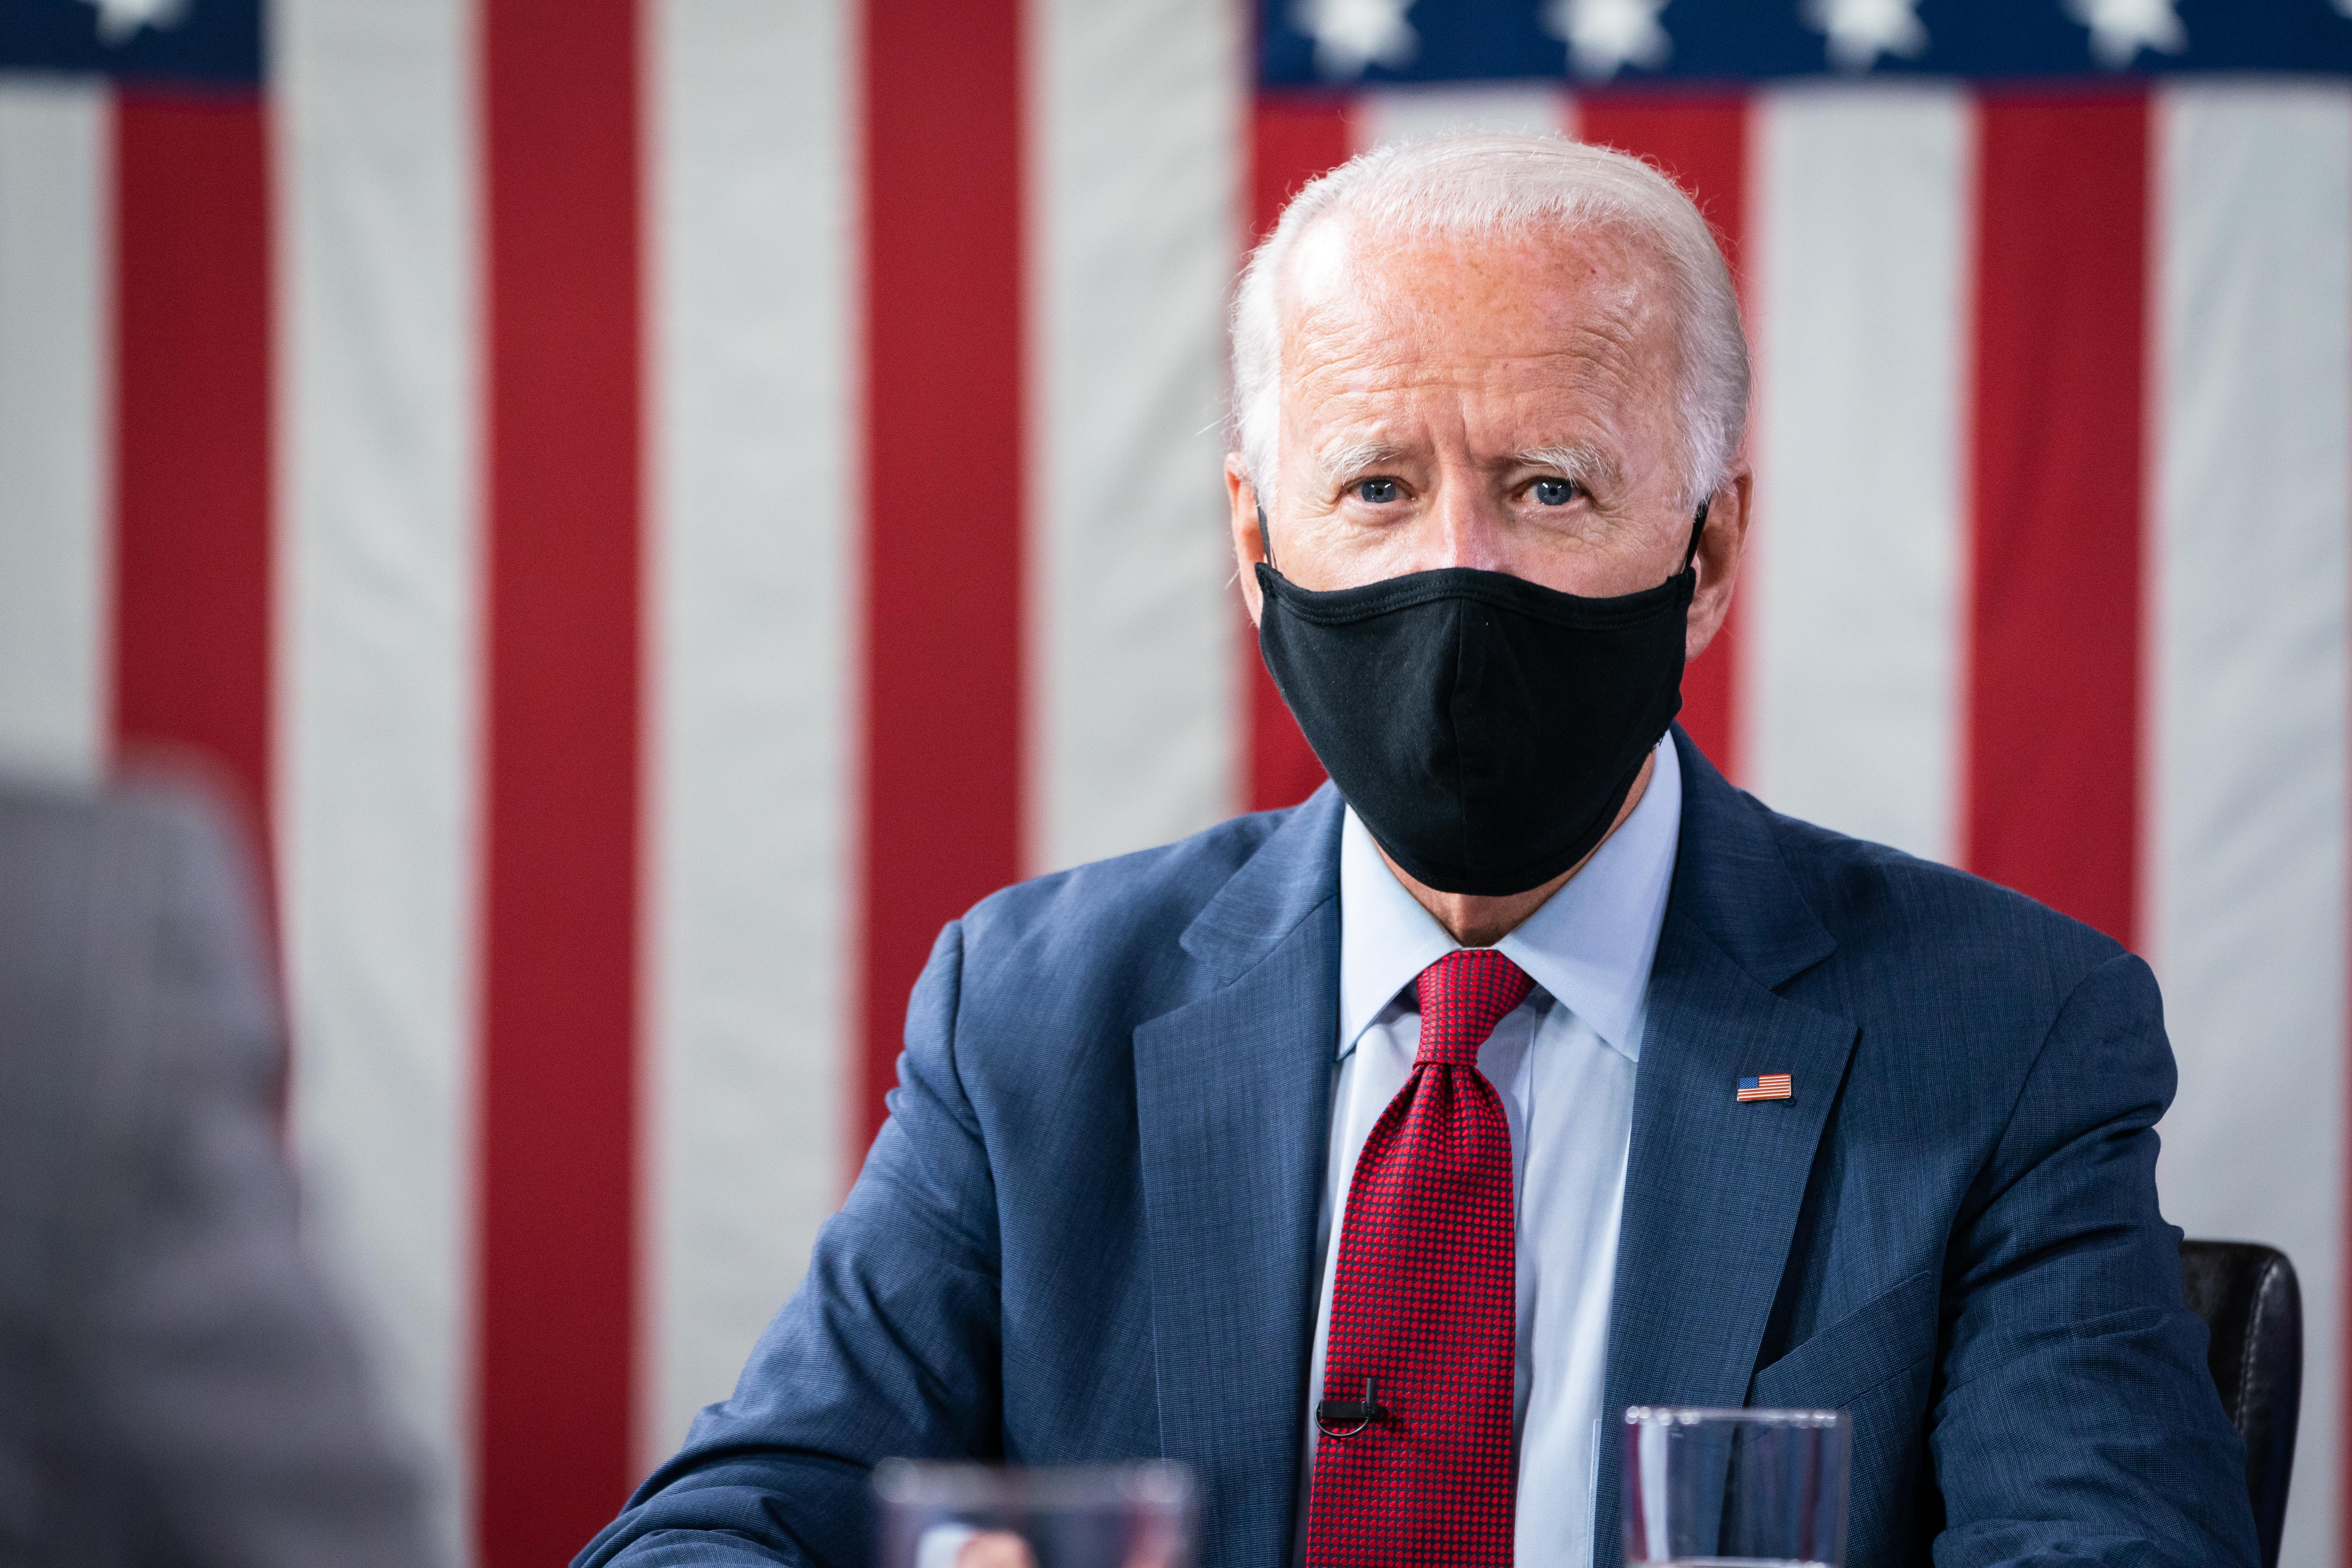 Biden Hits Campaign Trail Blames Trump For City Violence Whyy